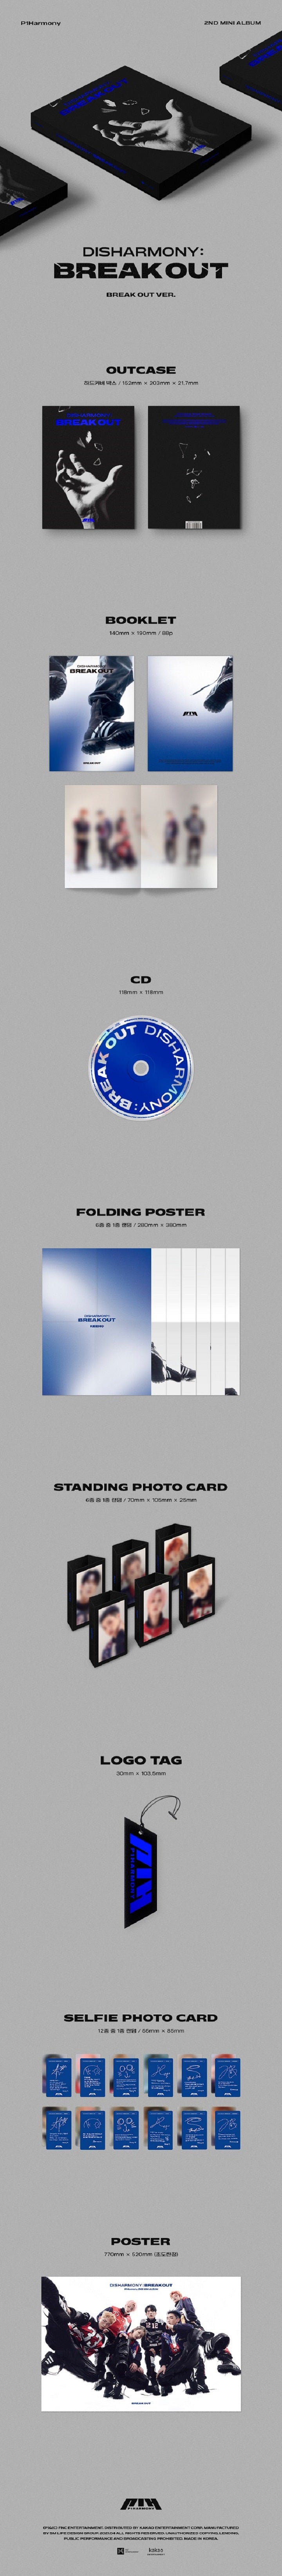 1 CD
1 Booklet (88 pages)
1 Folding Poster
1 Standing Photo Card (random out of 6 types)
1 Logo Tag
1 Selfie Photo Card (r...